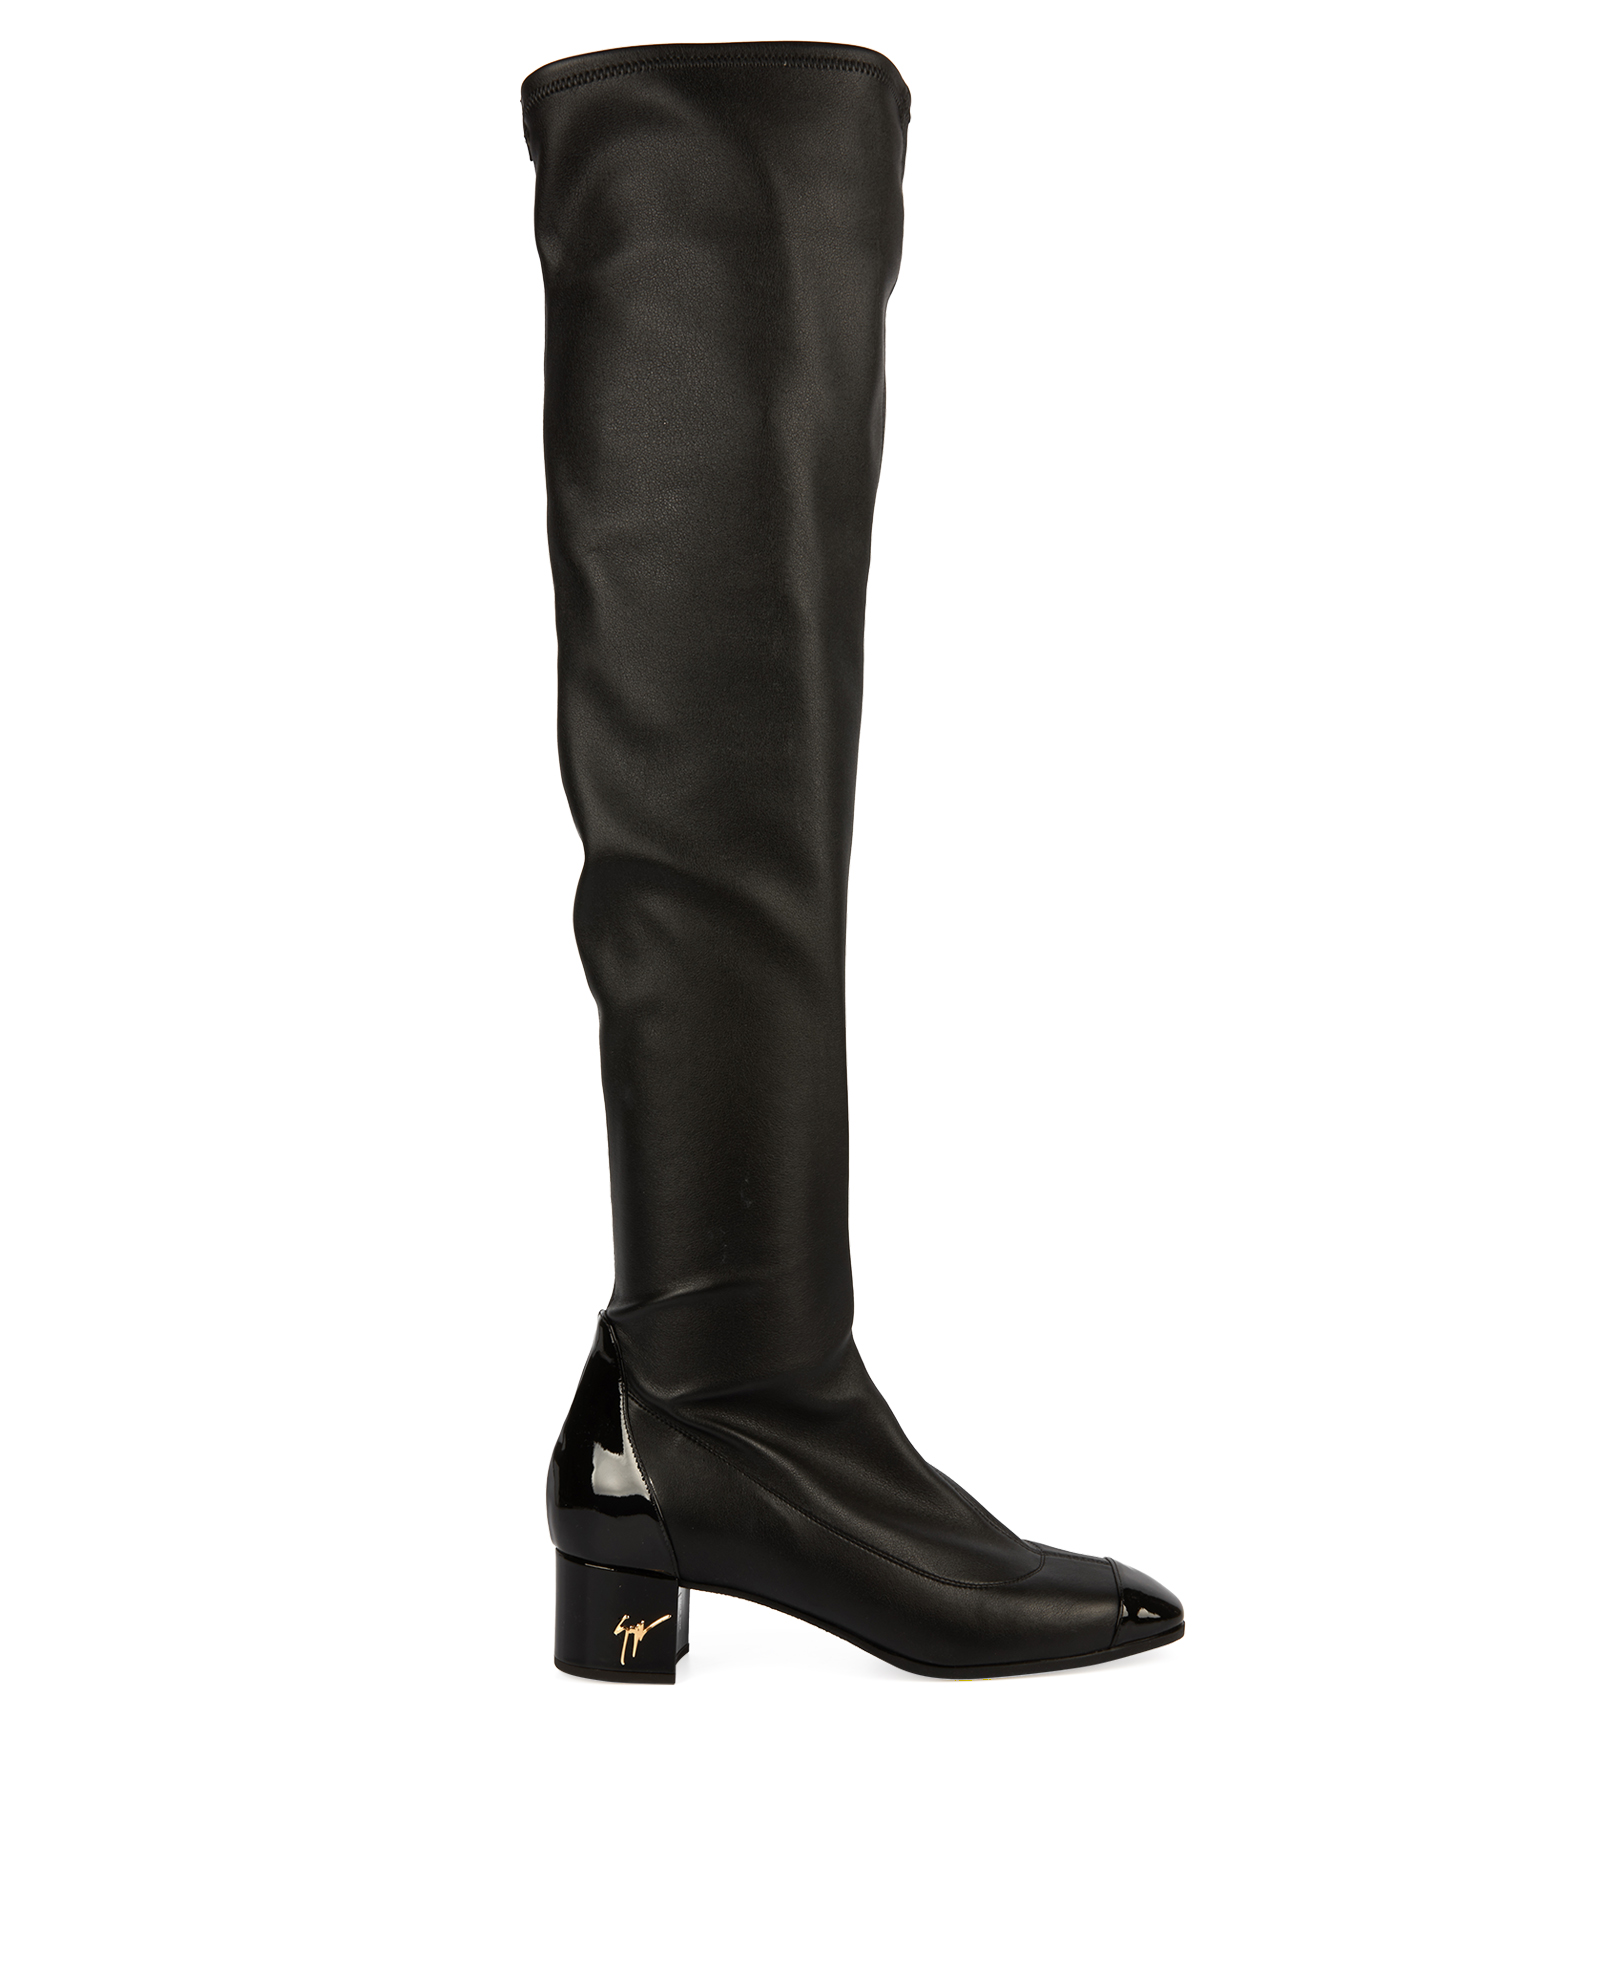 Giuseppe Zanotti Quad Thigh High Boots, Boots - Designer | Buy Sell Exchange